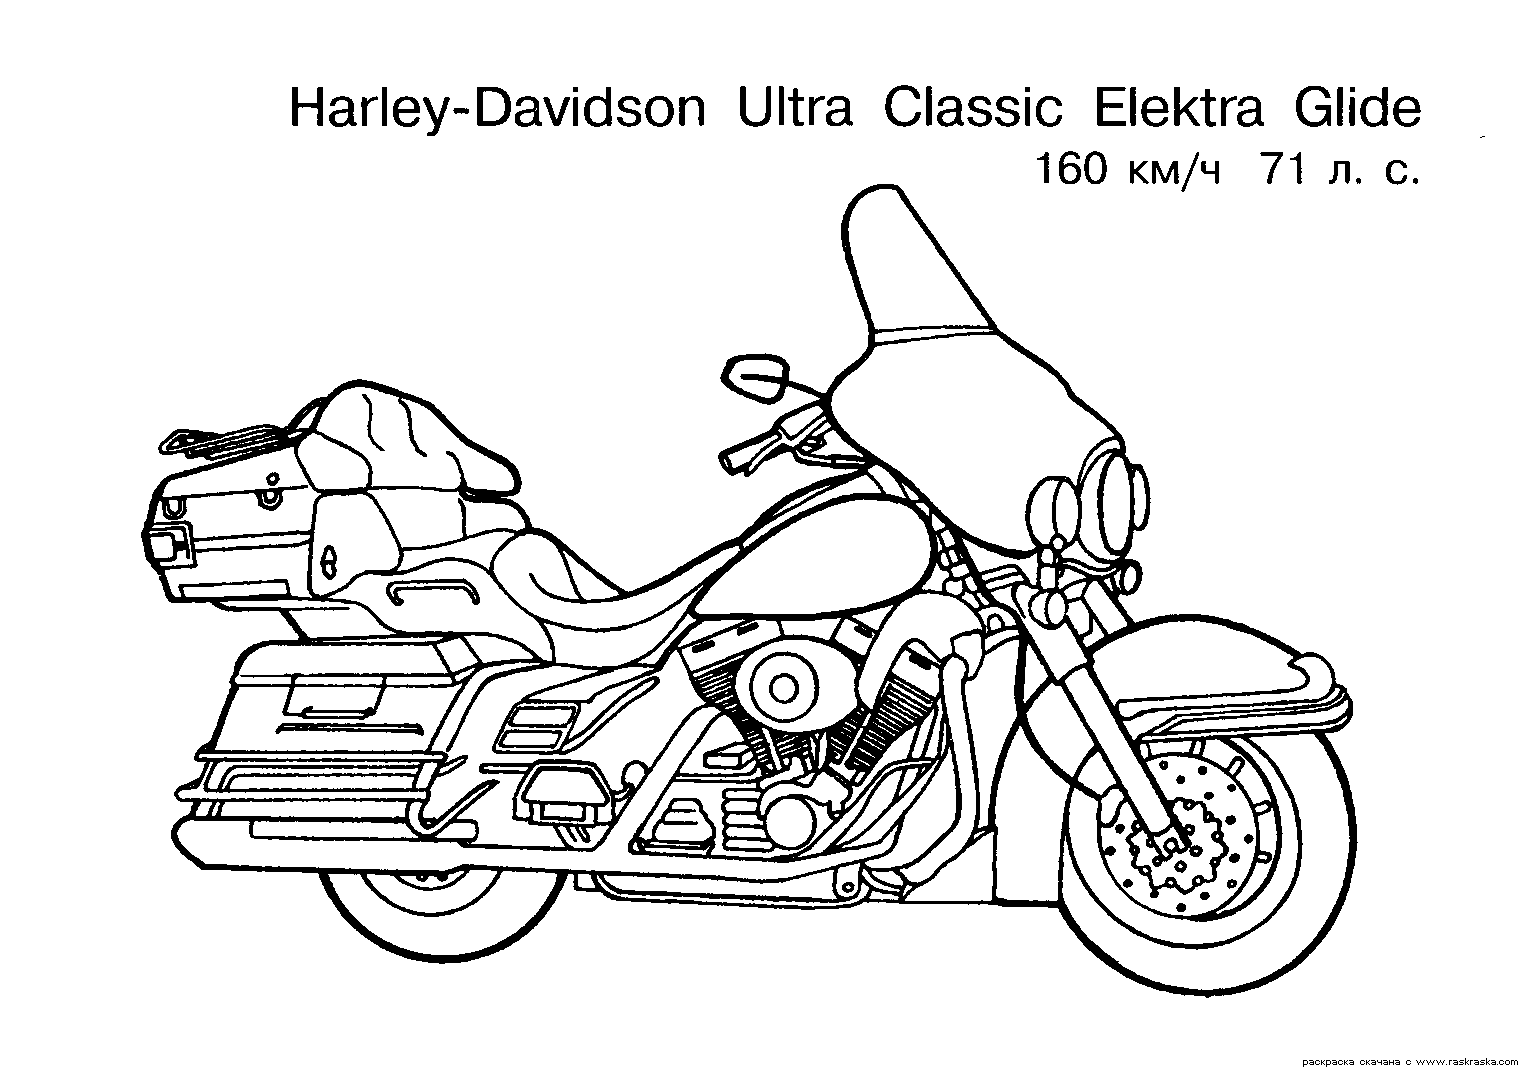 Free Motorcycle coloring page, letscoloringpages.com, Harley-Davidson Ultra Classic